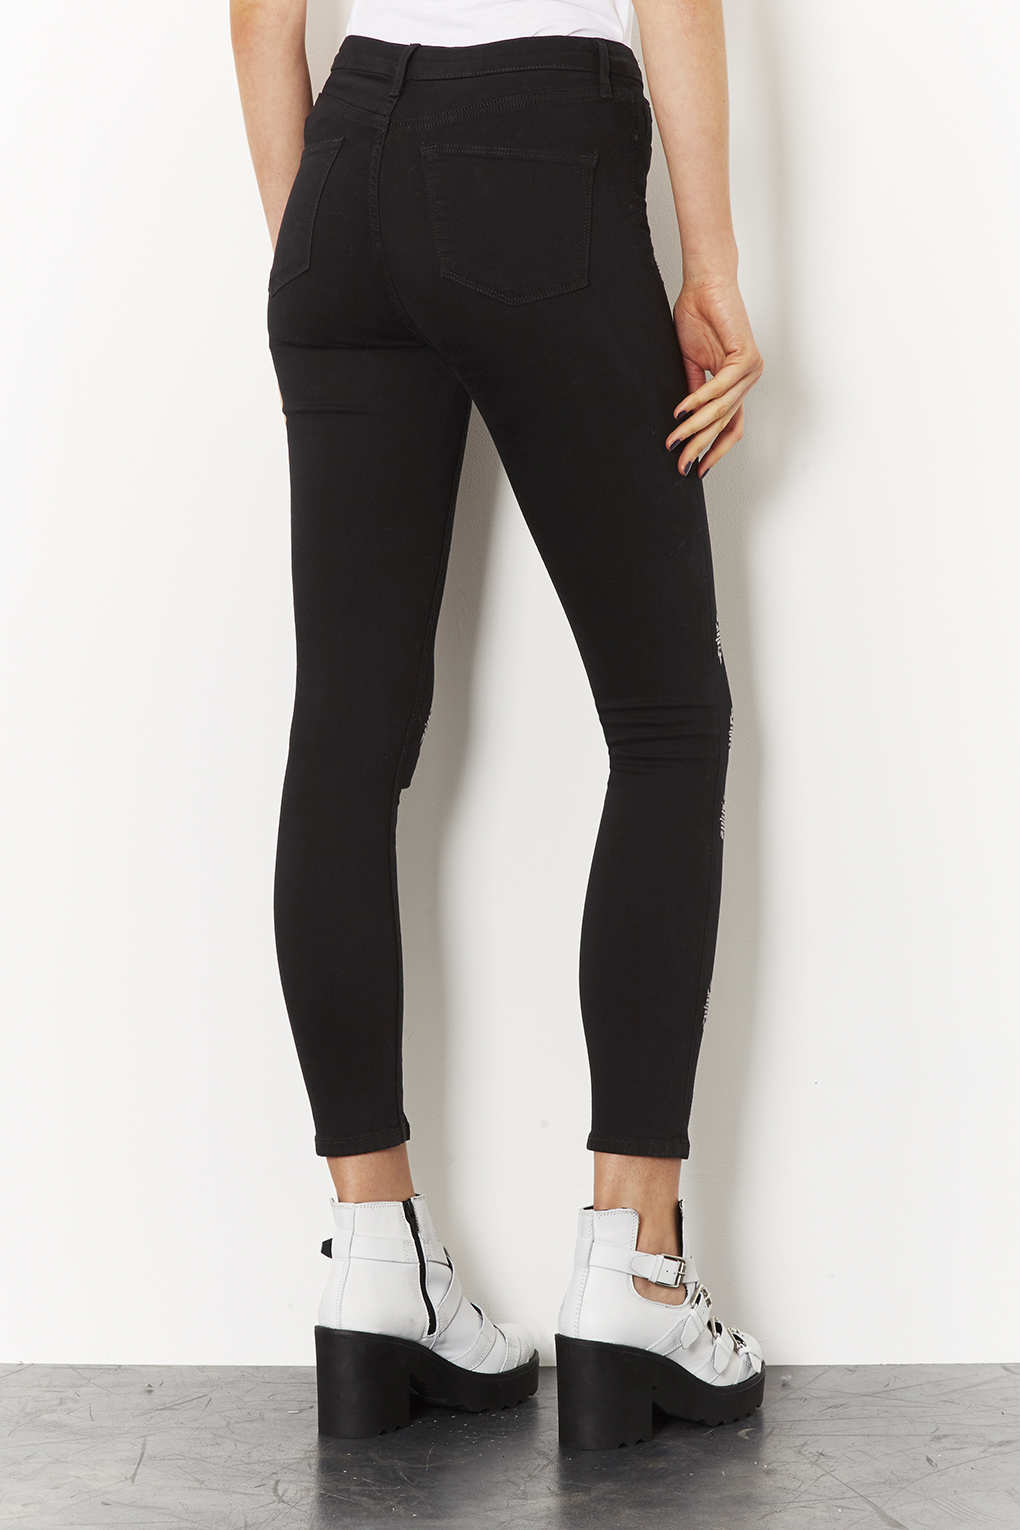 Moto Embroidered Jamie Jeans in Black Lyst